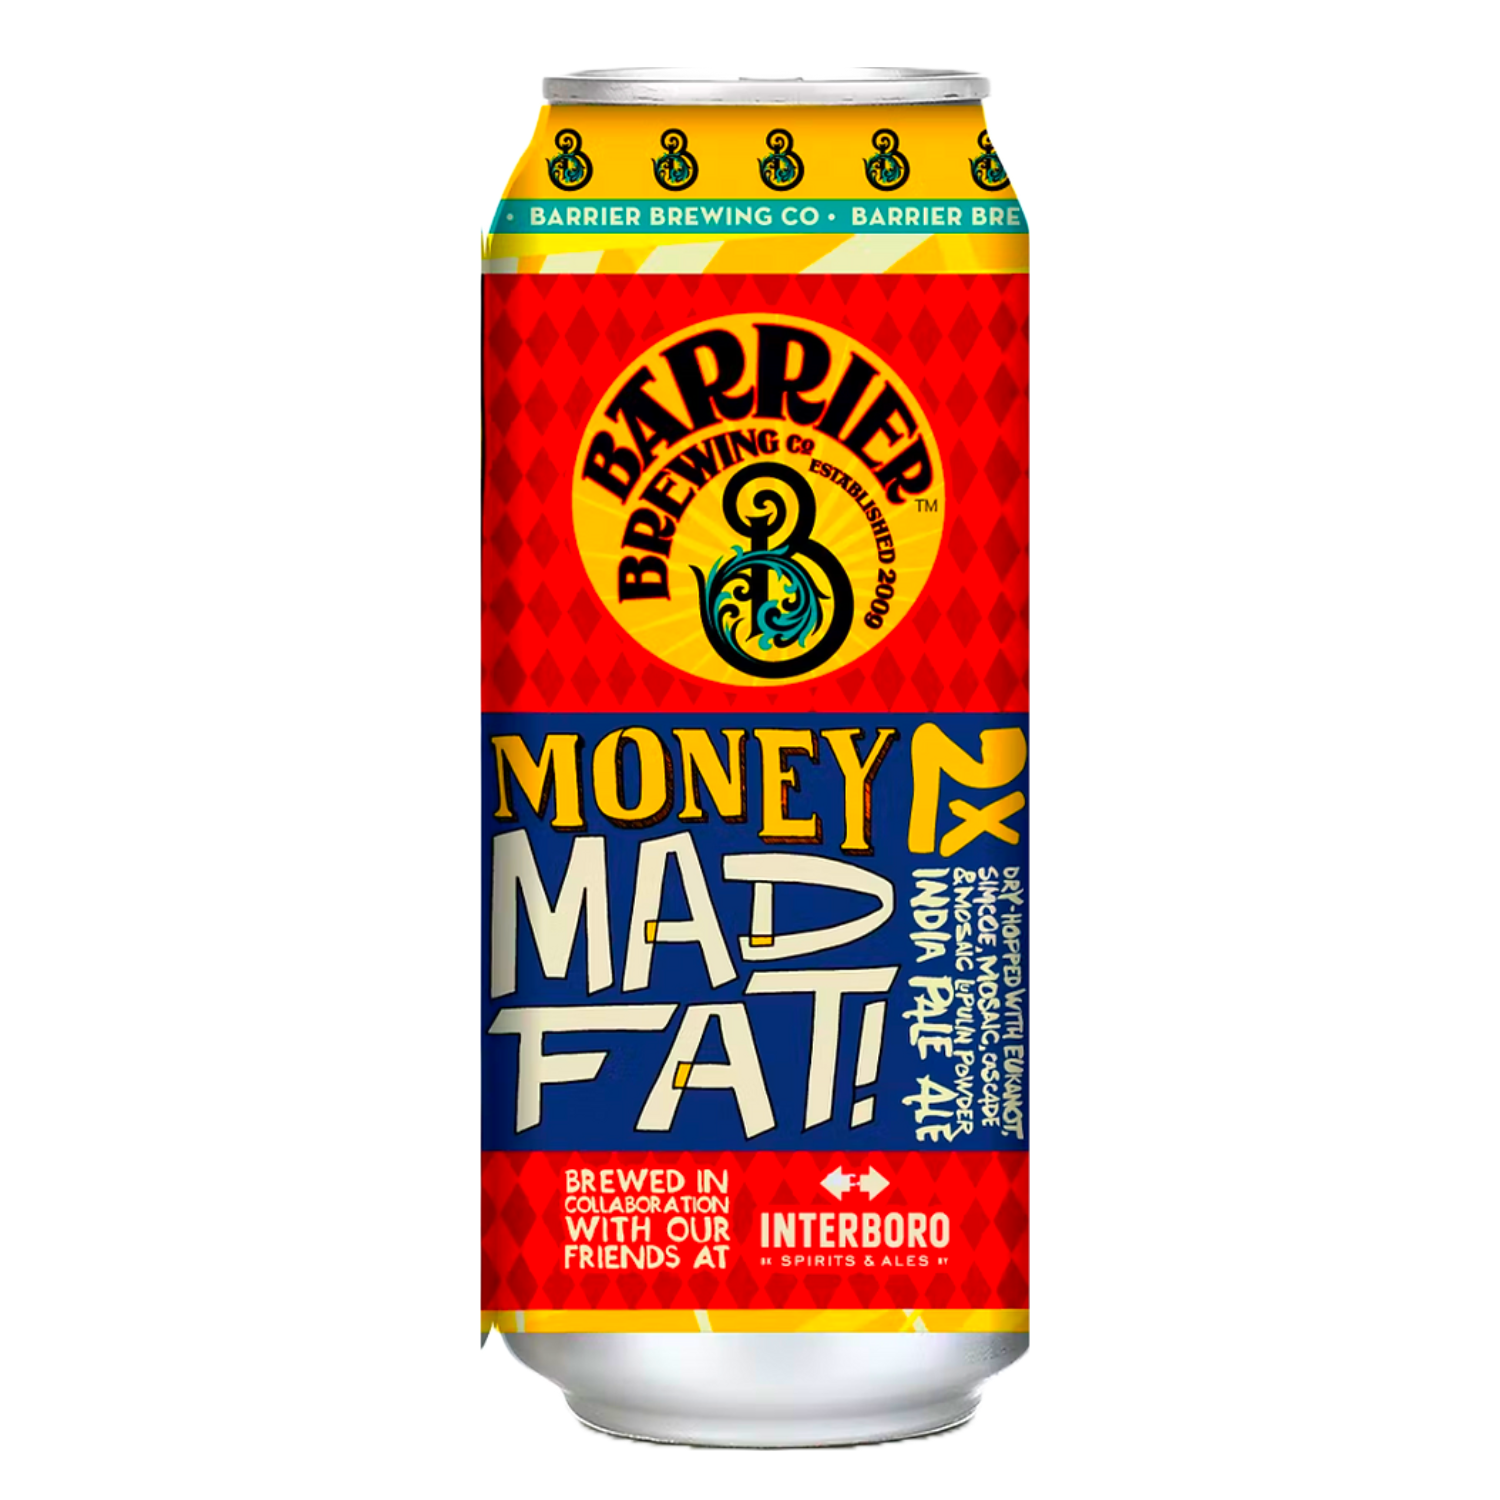 Barrier Money Mad Fat! IPA